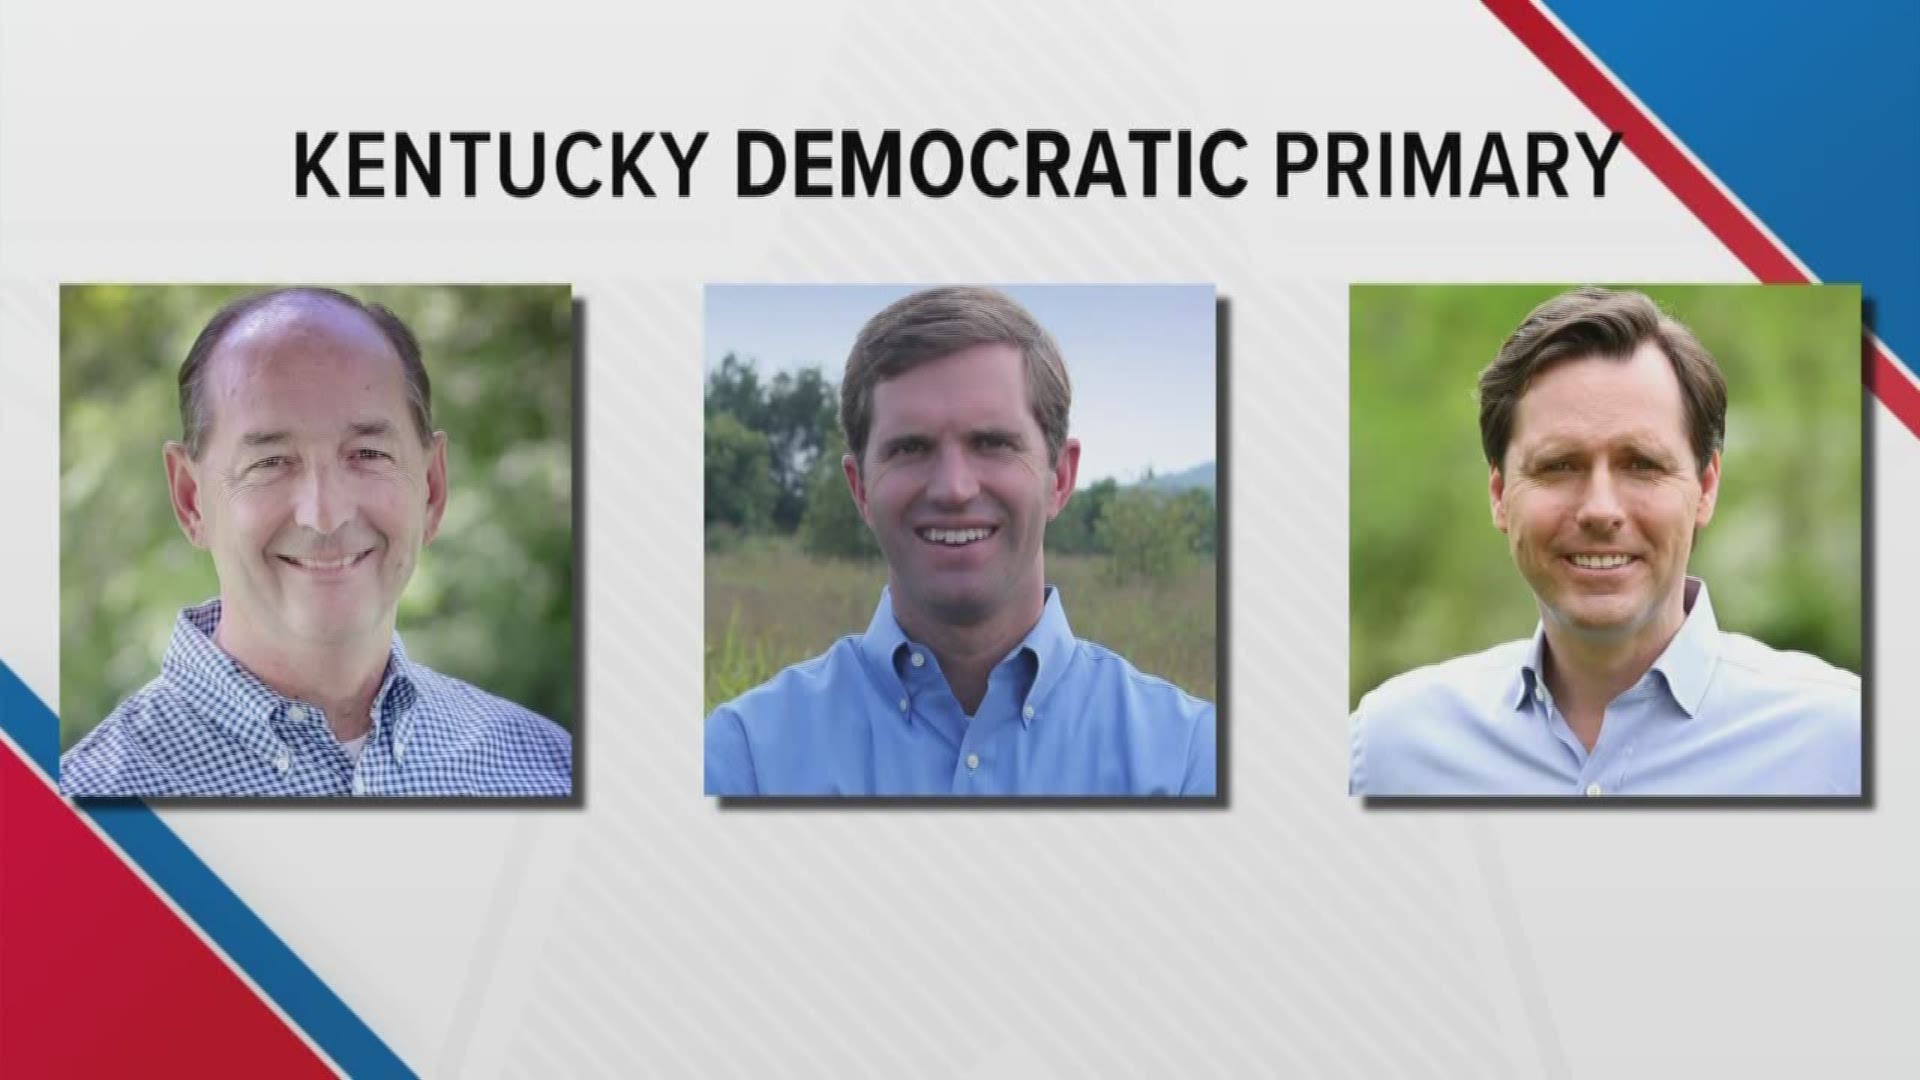 Kentucky's primary election is happening on Tuesday, and voter turnout is expected to be about 12 percent.